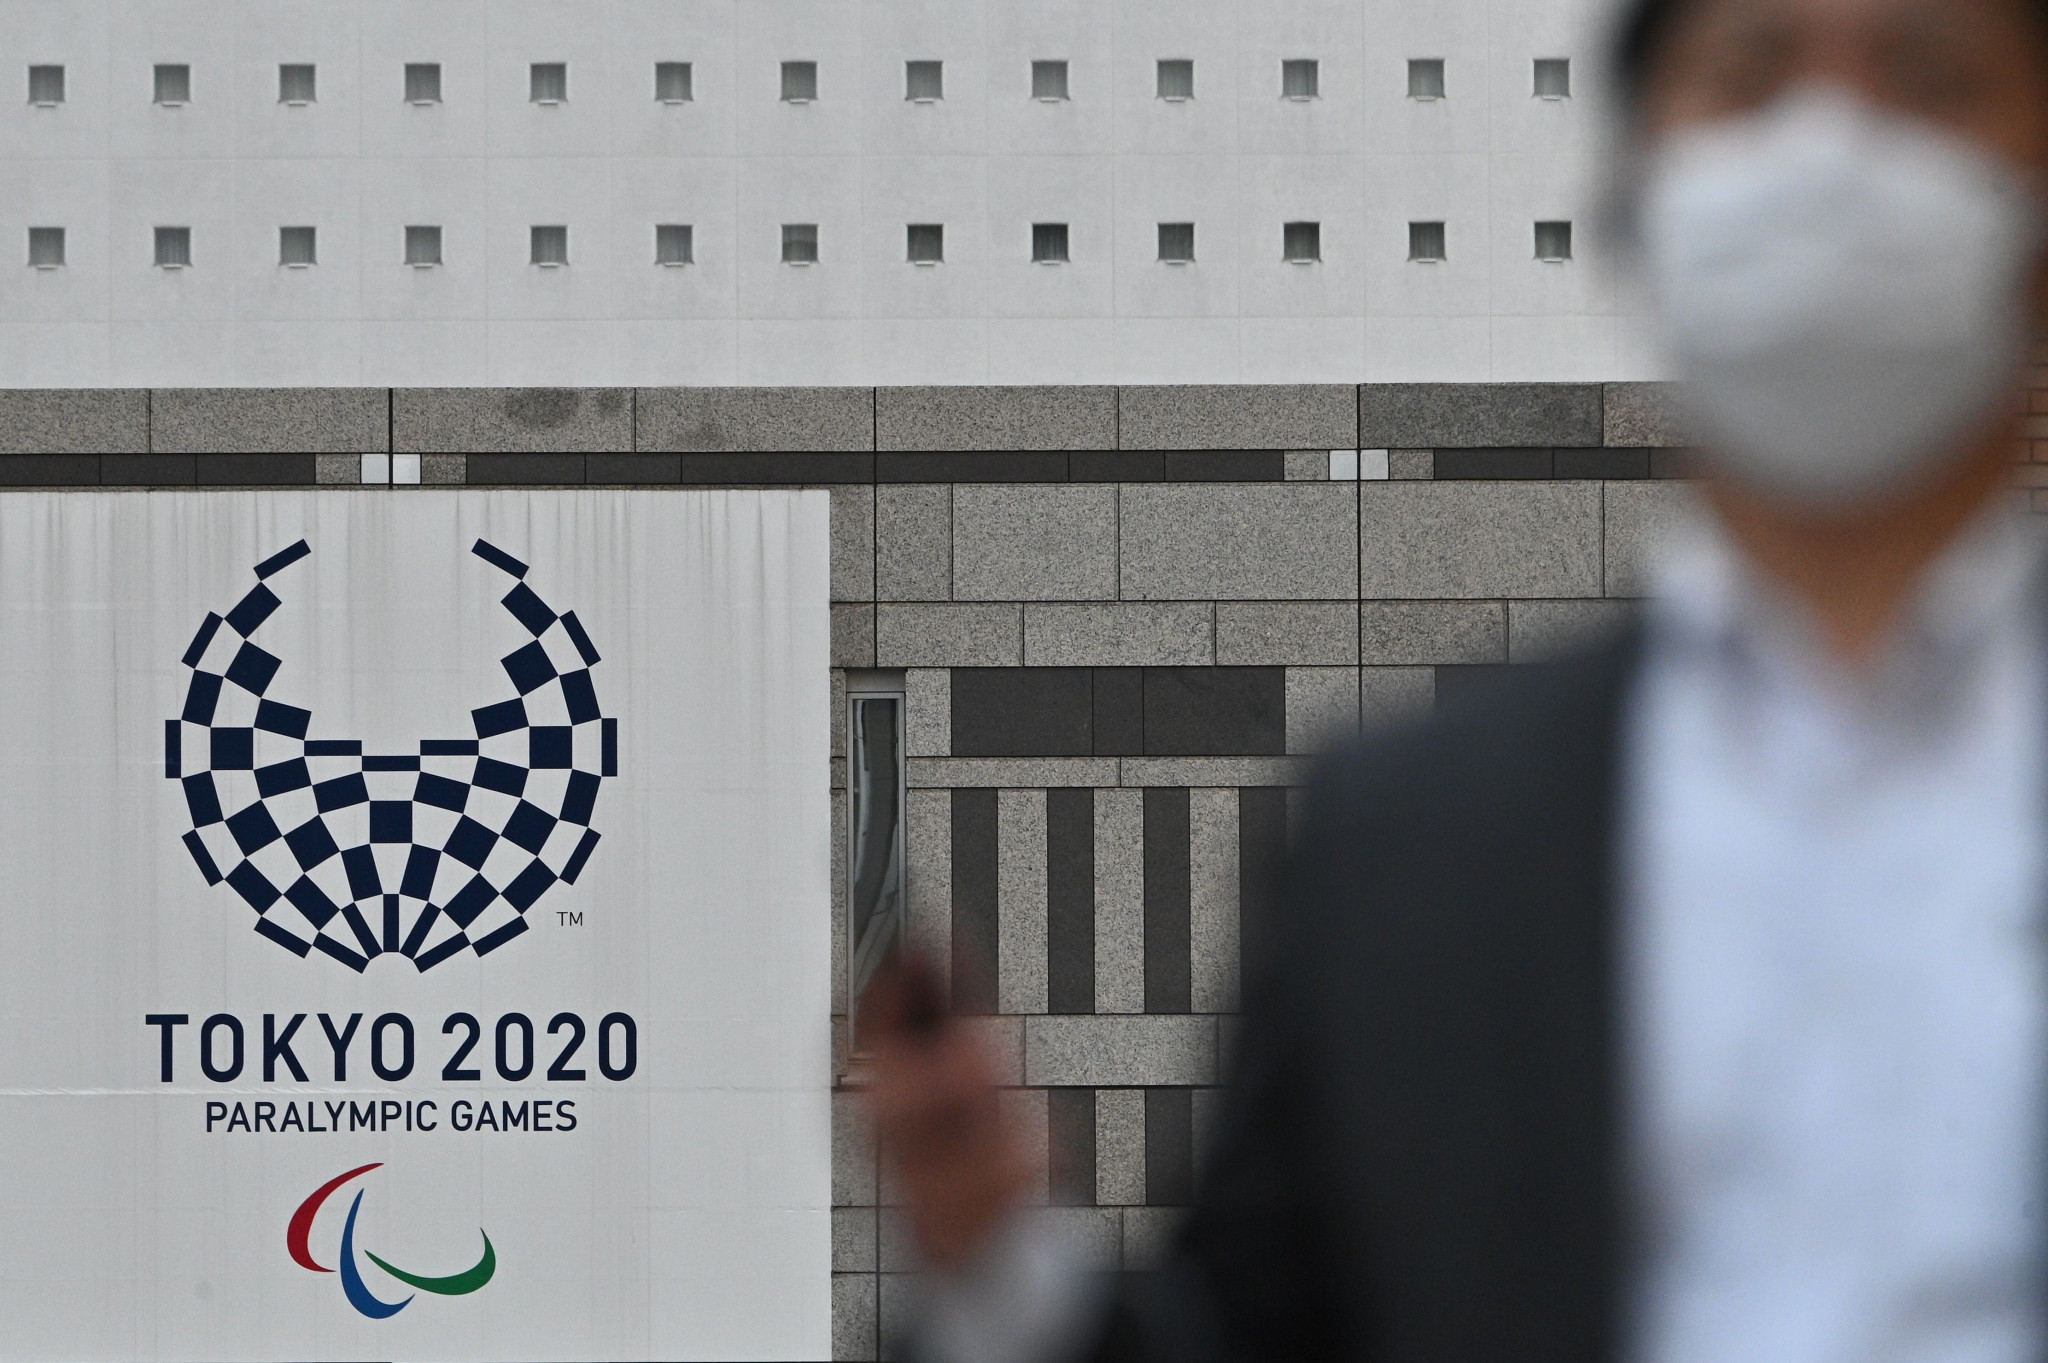 The Tokyo 2020 Paralympic Games were postponed to 2021 due to the coronavirus pandemic ©Getty Images